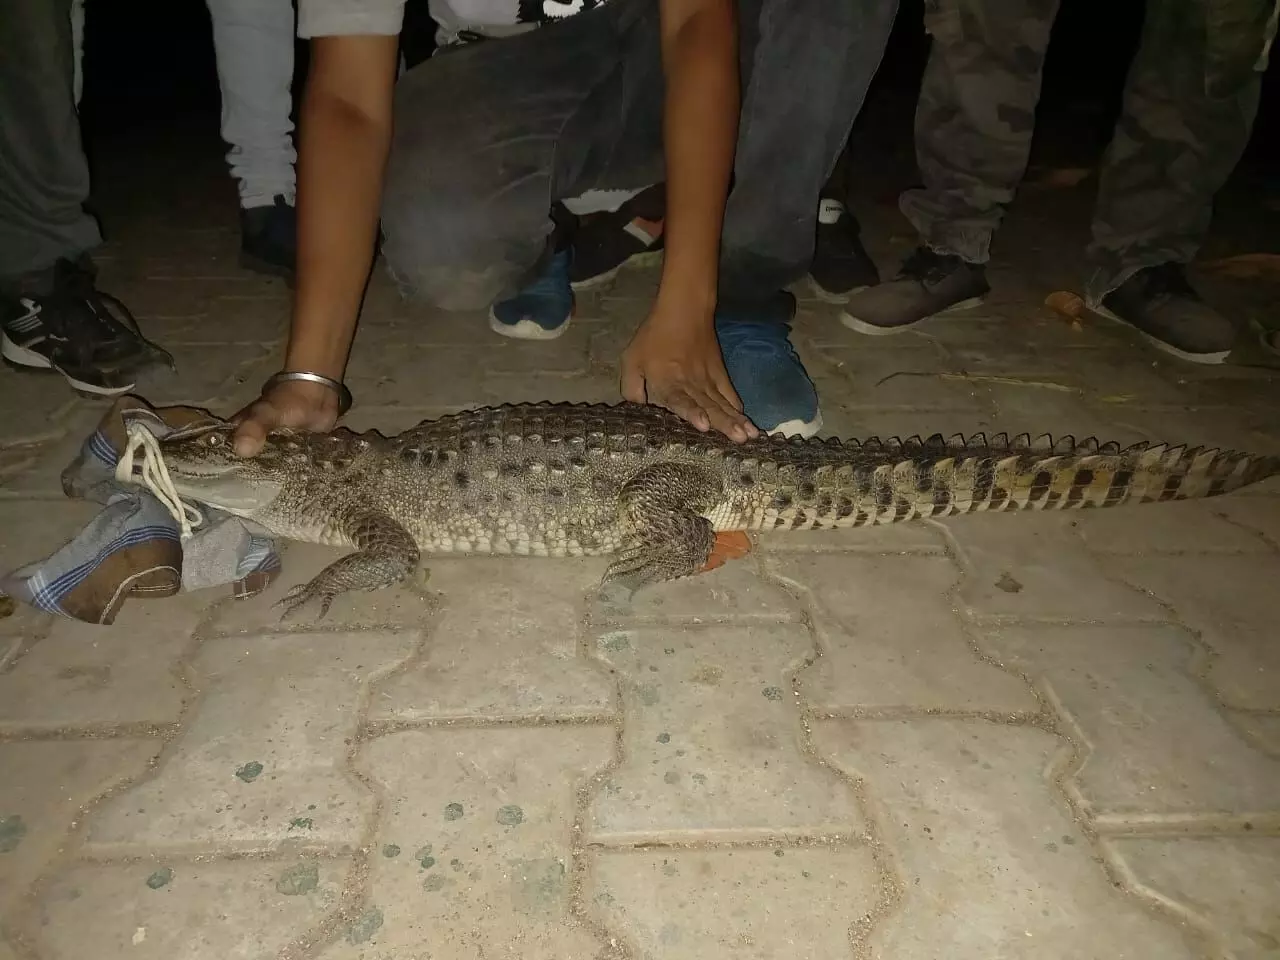 GSPCA and social forestry department caught one crocodile from residential area near Bill village